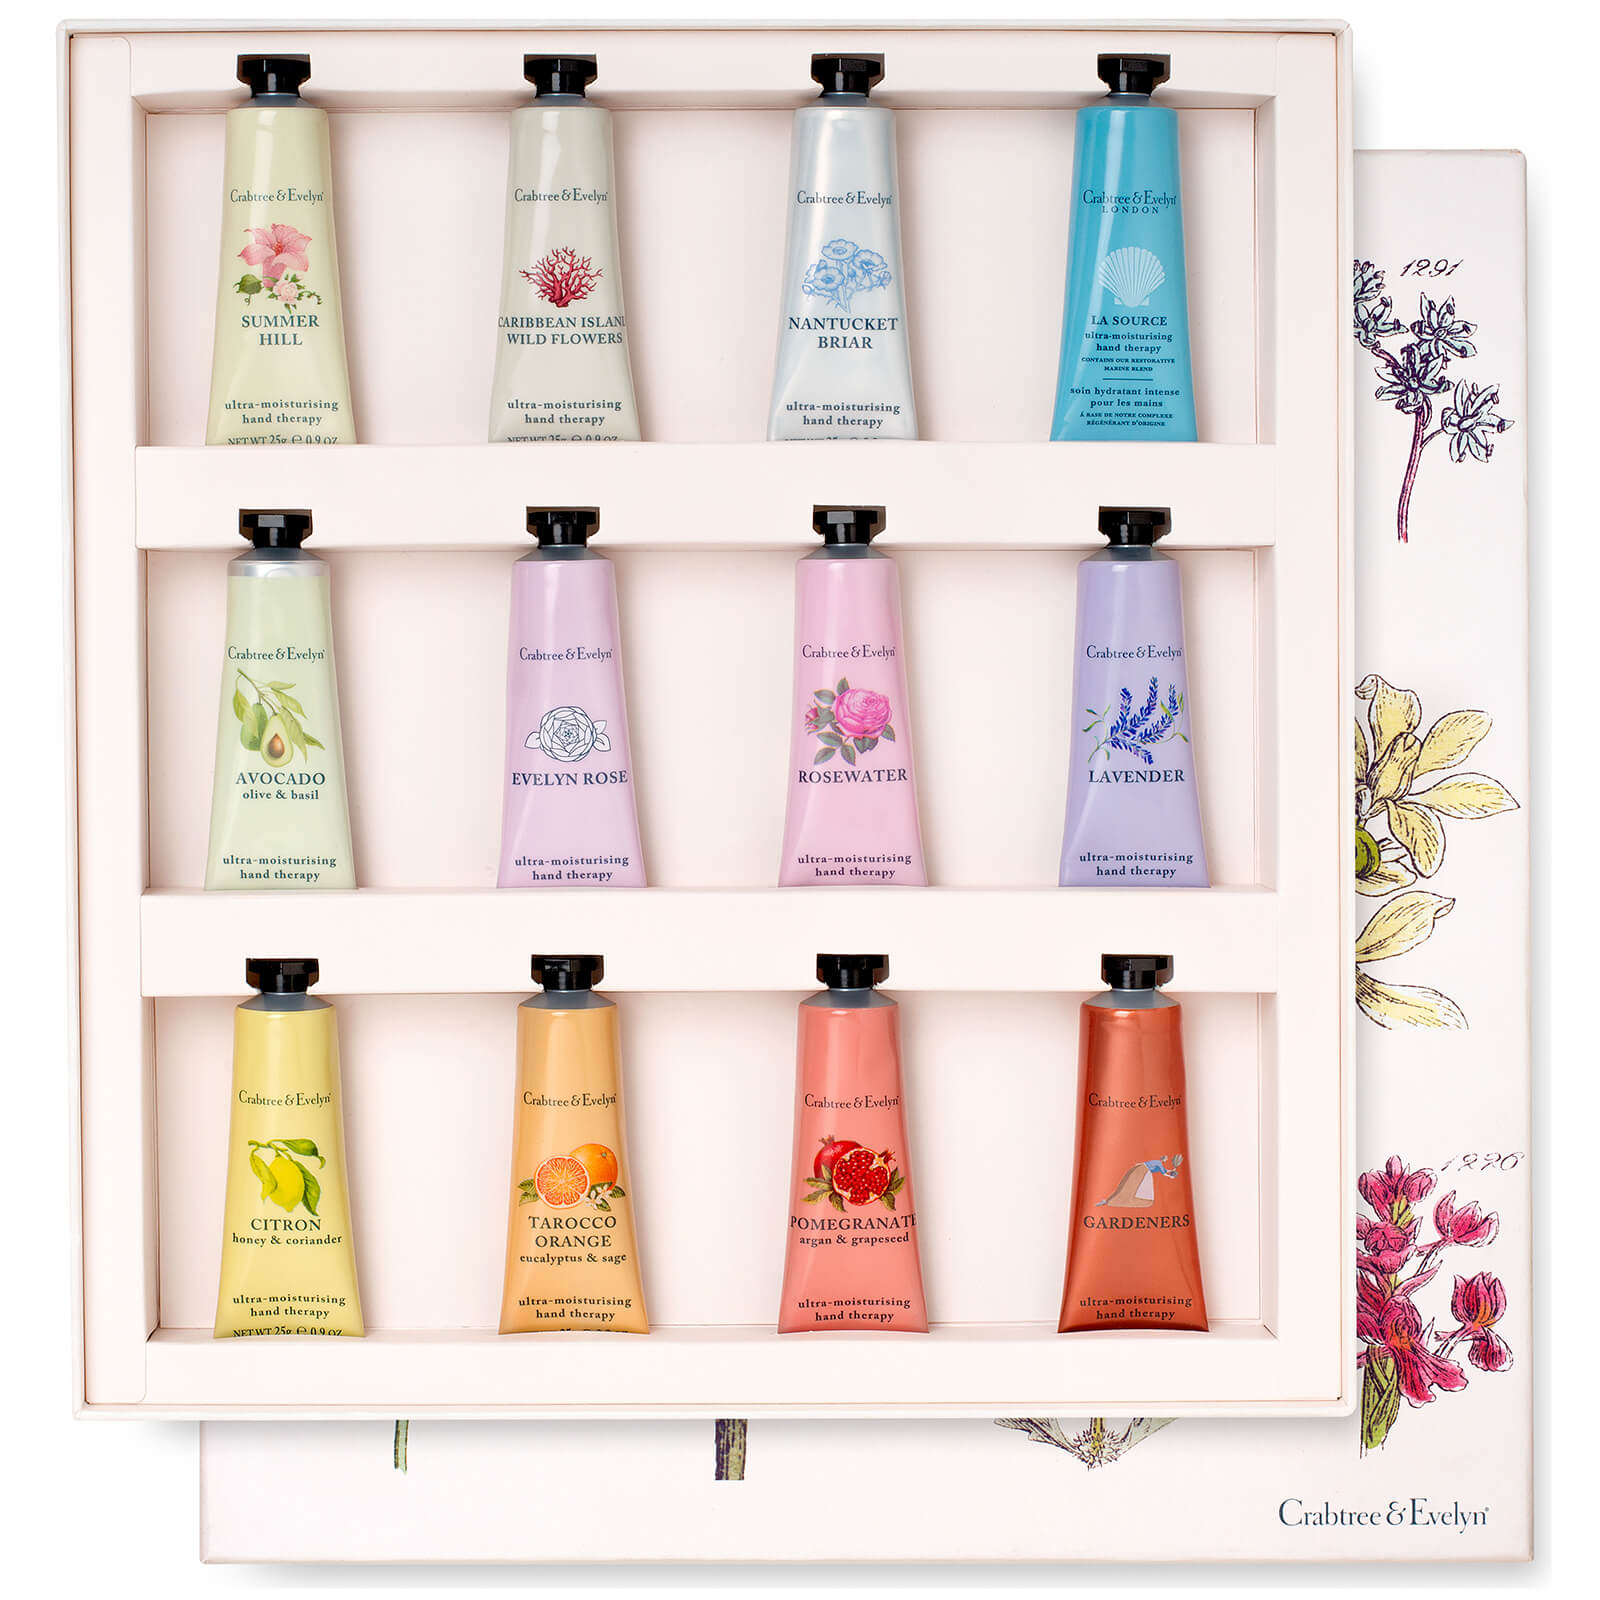 Crabtree & Evelyn Hand Therapy Gift Set 12 x 25g